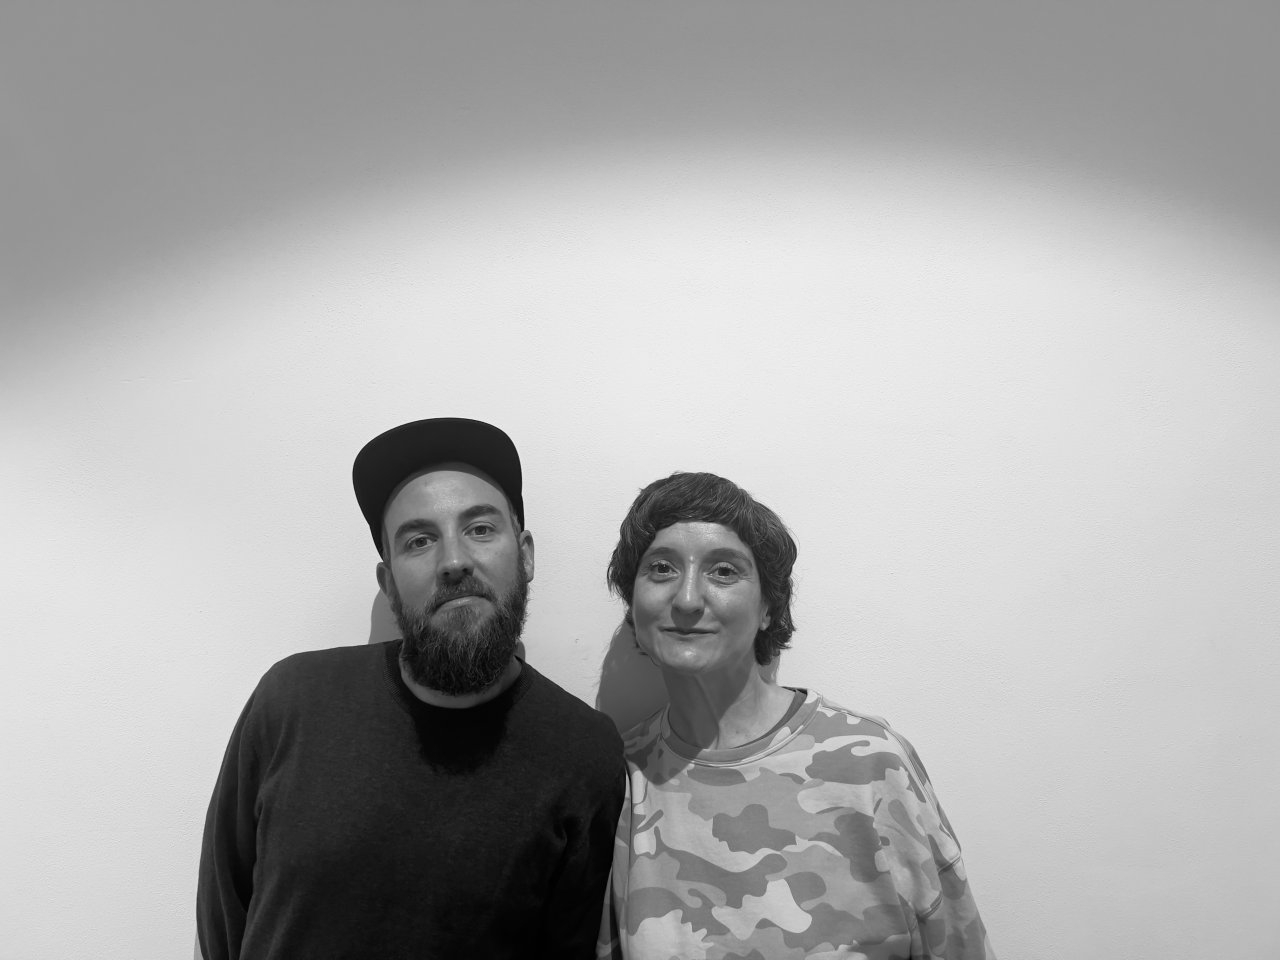 4. German artists Barbara Herold & Florian Huth were in residence at the House of Arts Ústí nad Labem